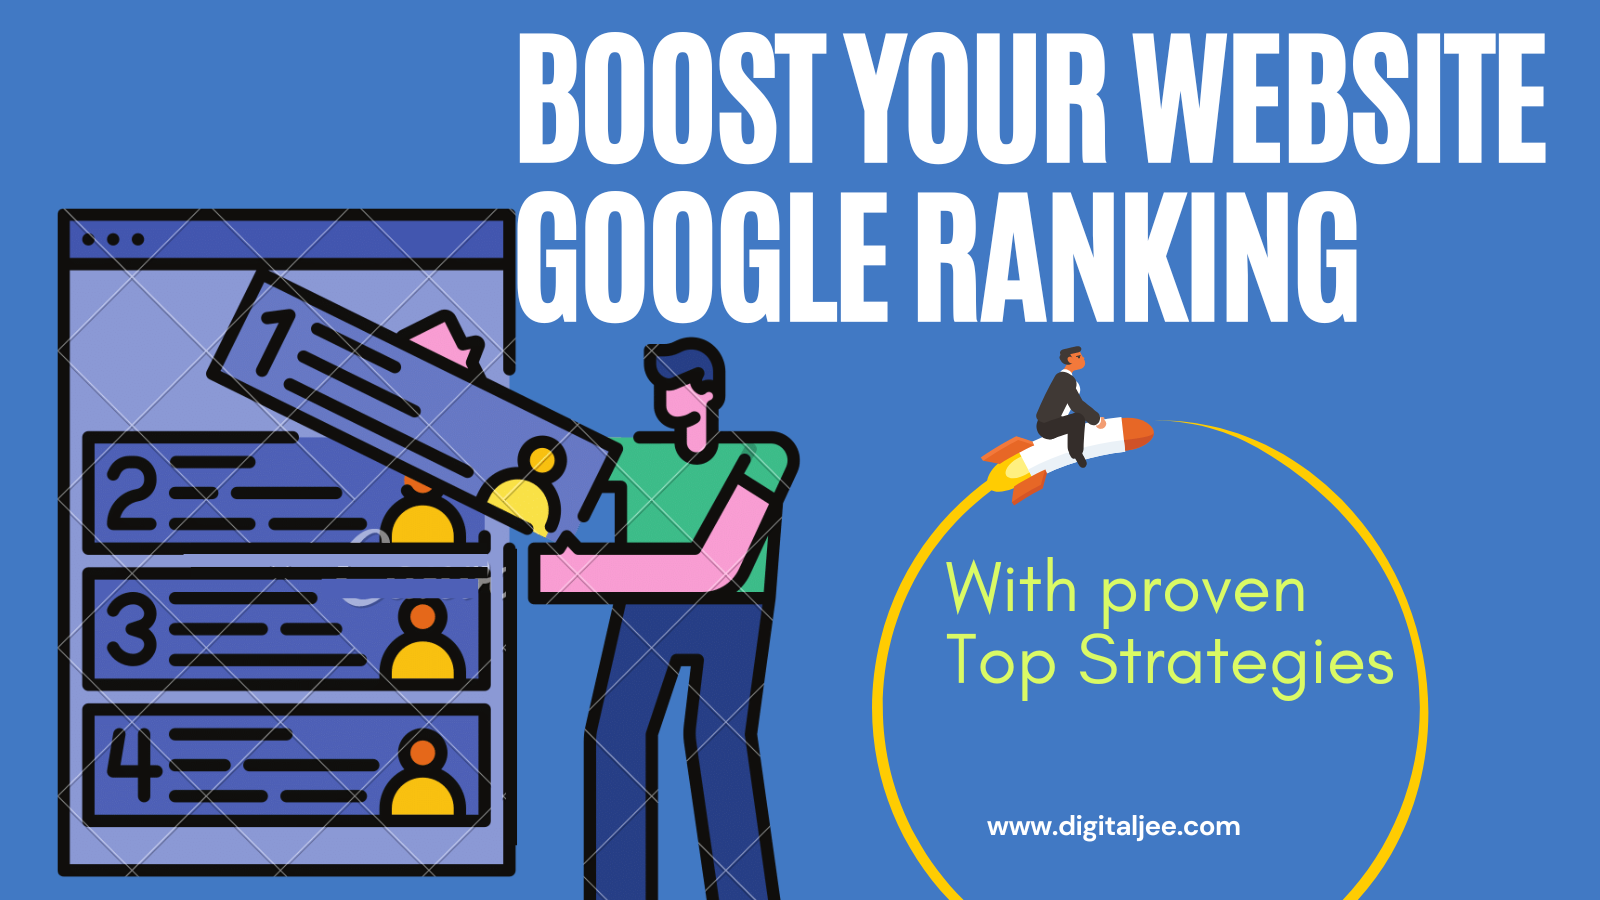 Boosting Your Website's Google Ranking